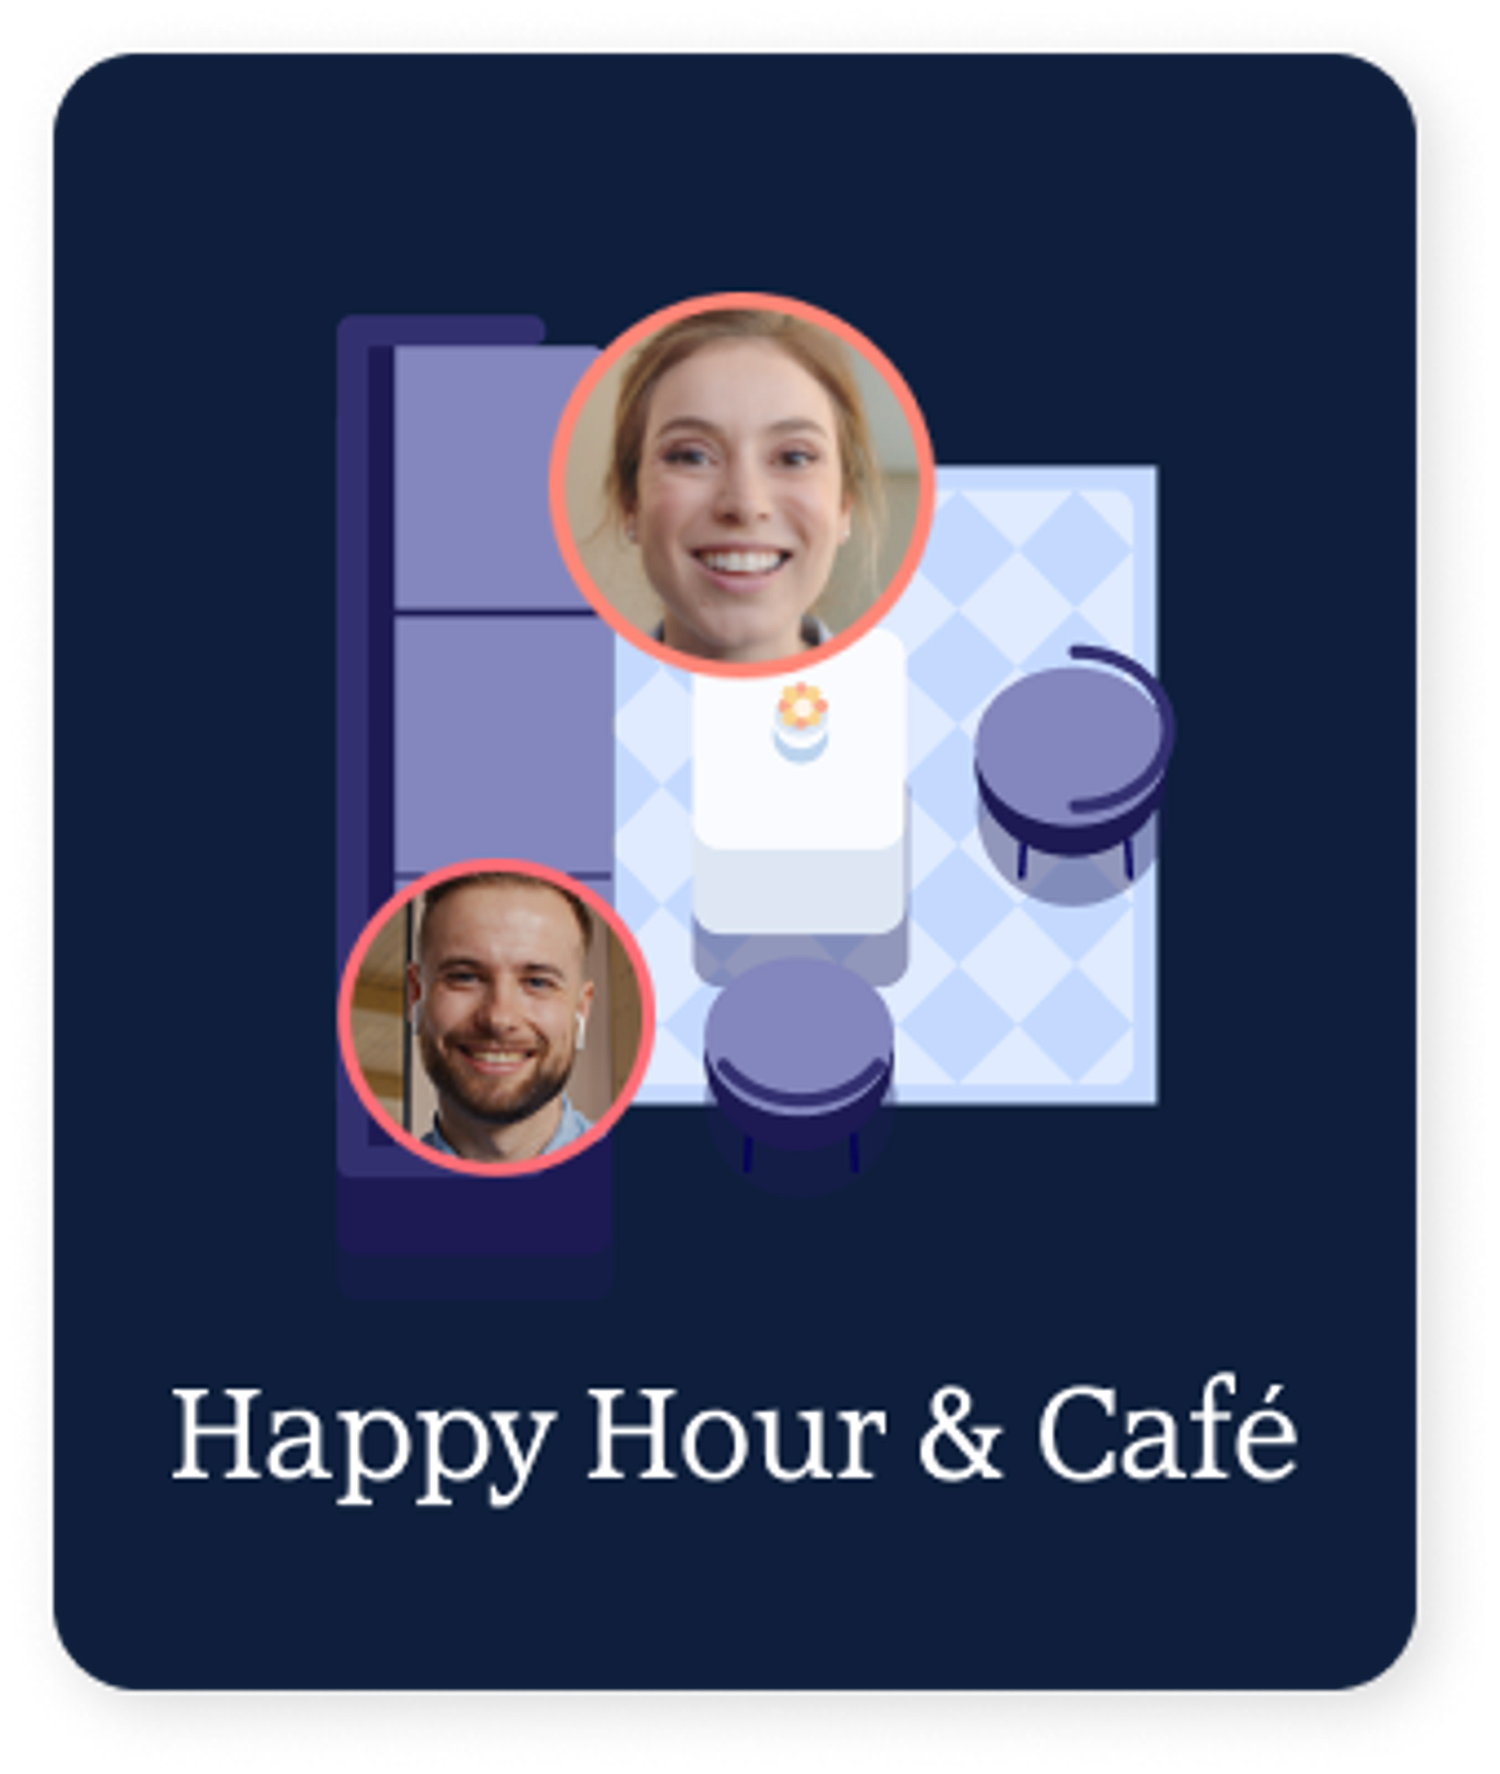 https://floorplans.remo.co/happy-hours-cafs